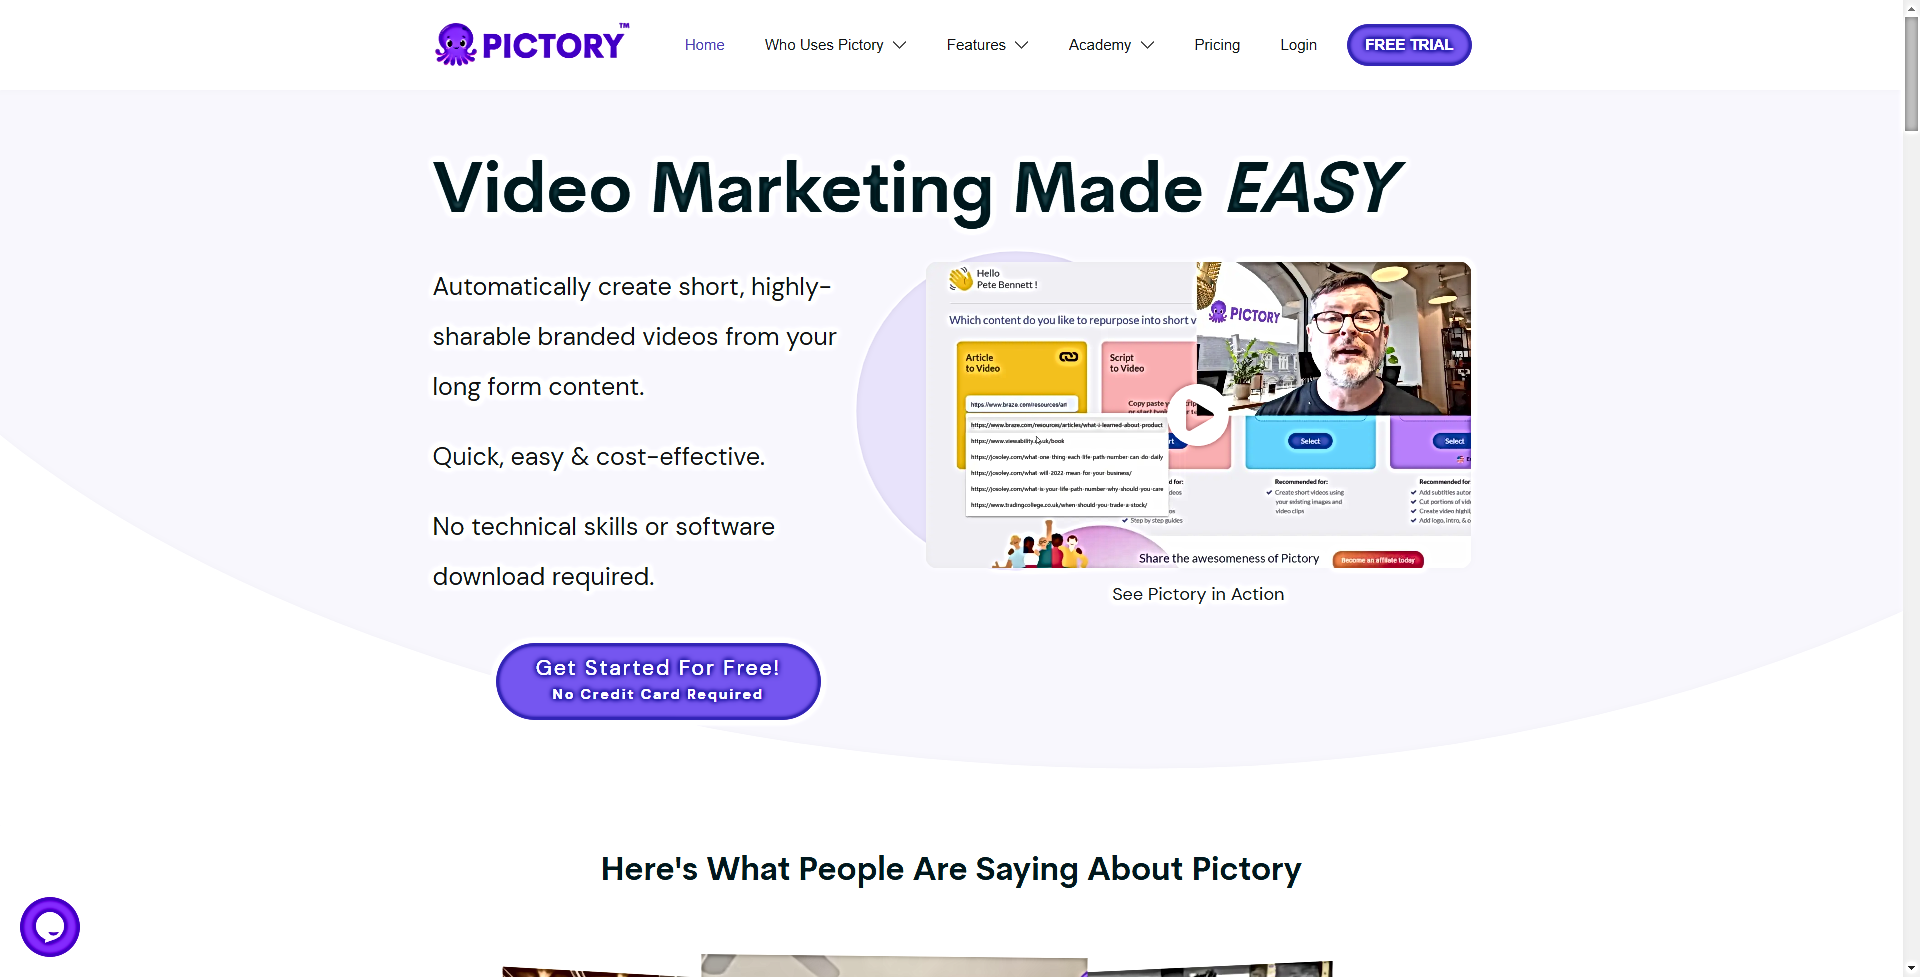 Pictory featured